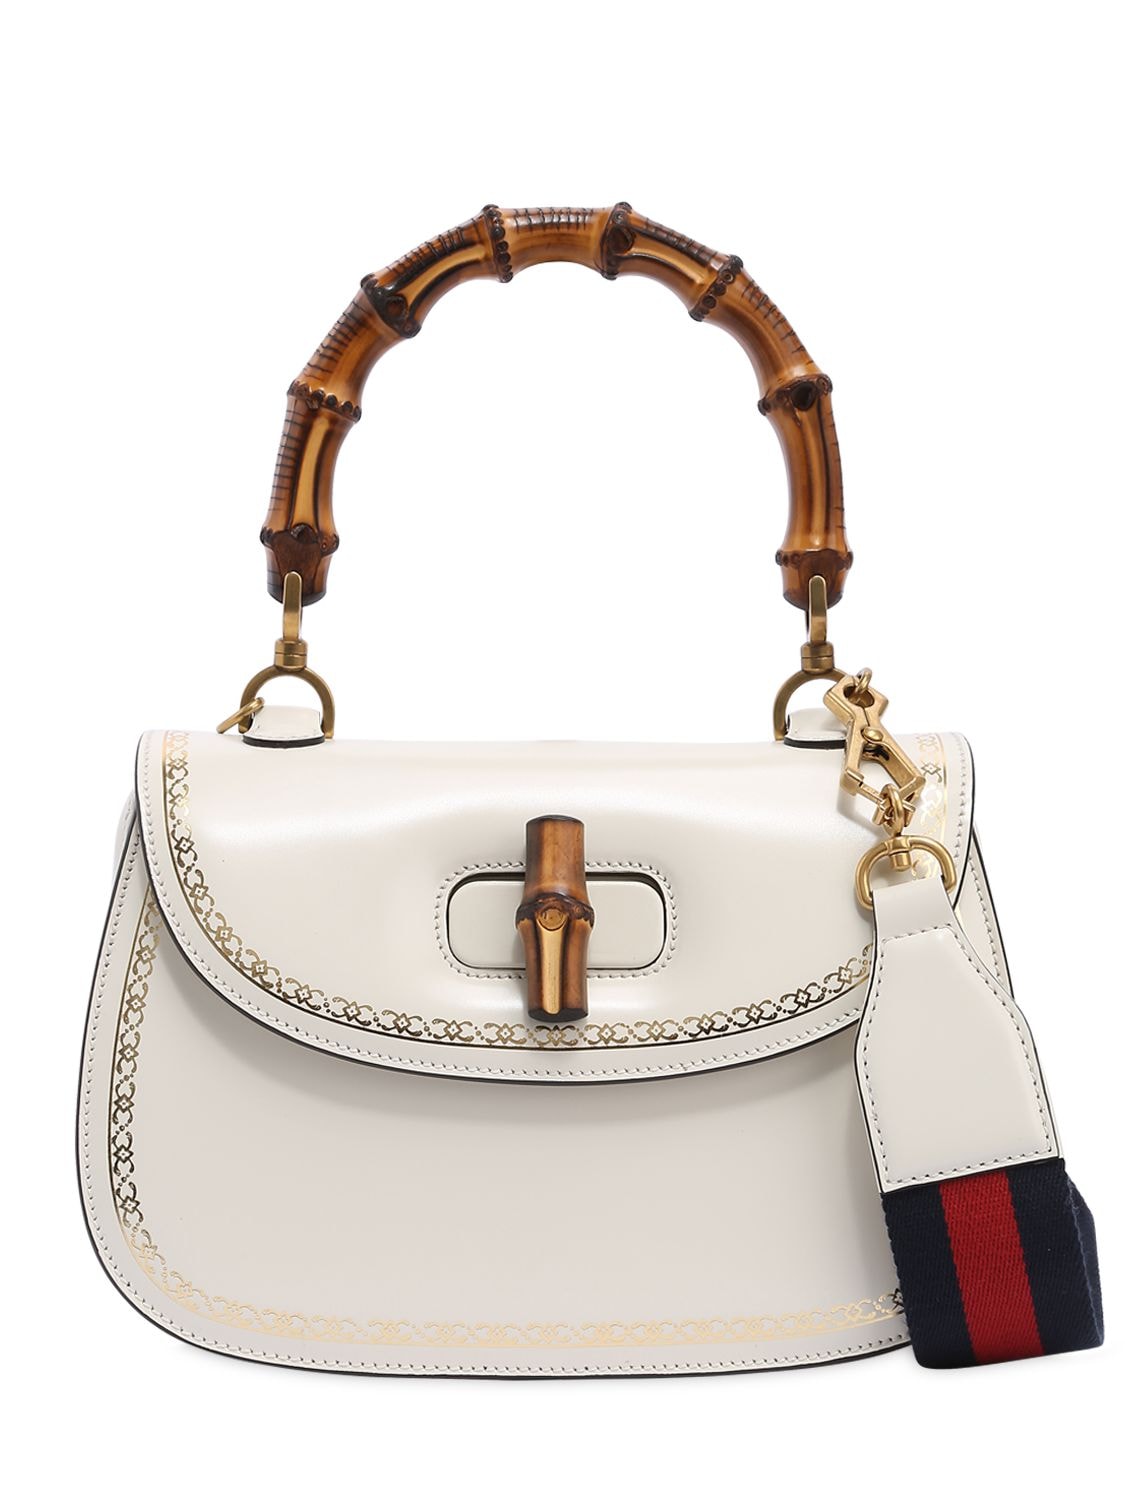 Gucci Bamboo & Leather Top Handle Bag In White